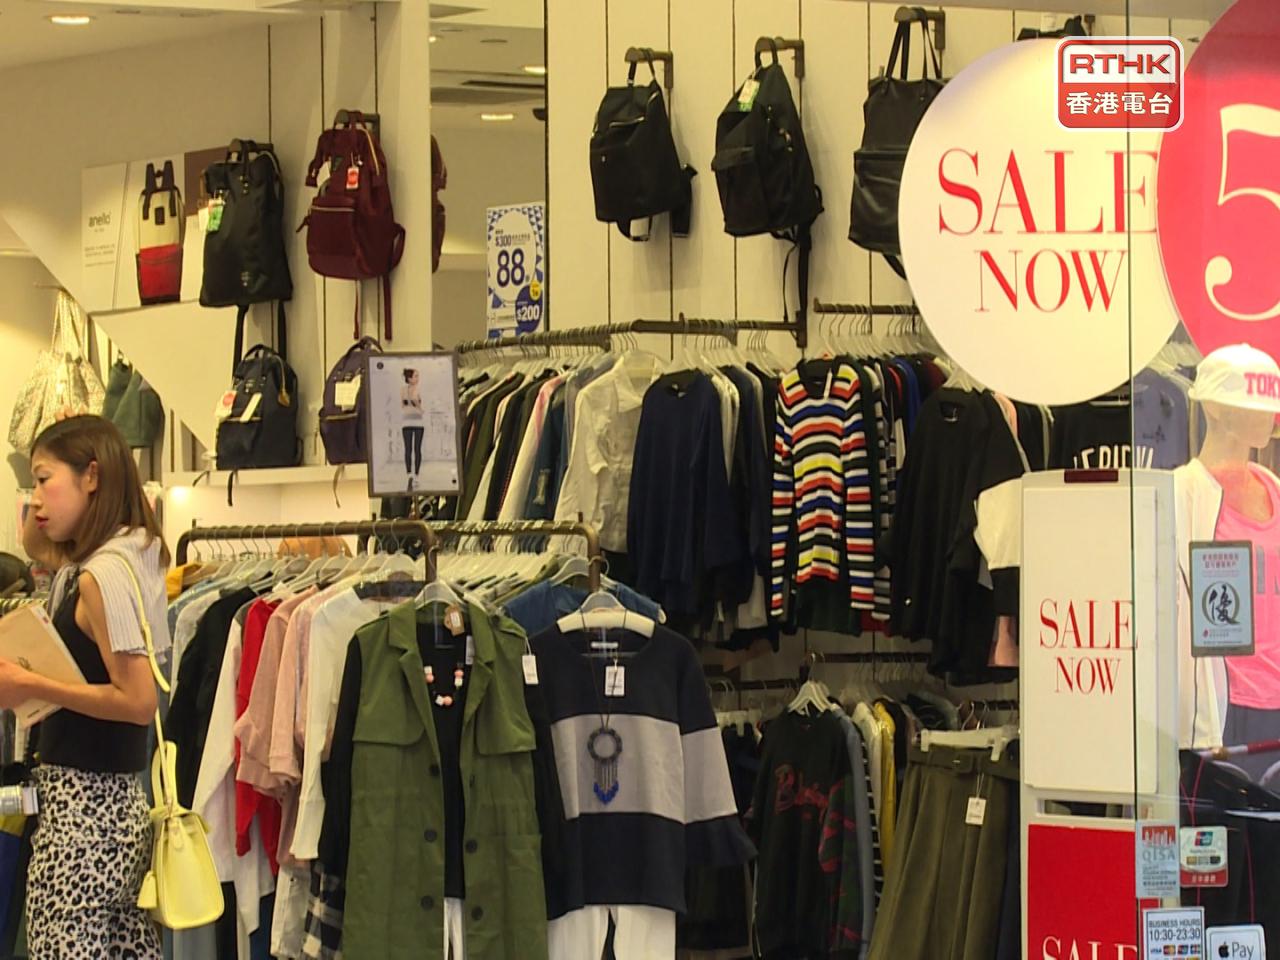 Retail sector moves to cater for new allowances